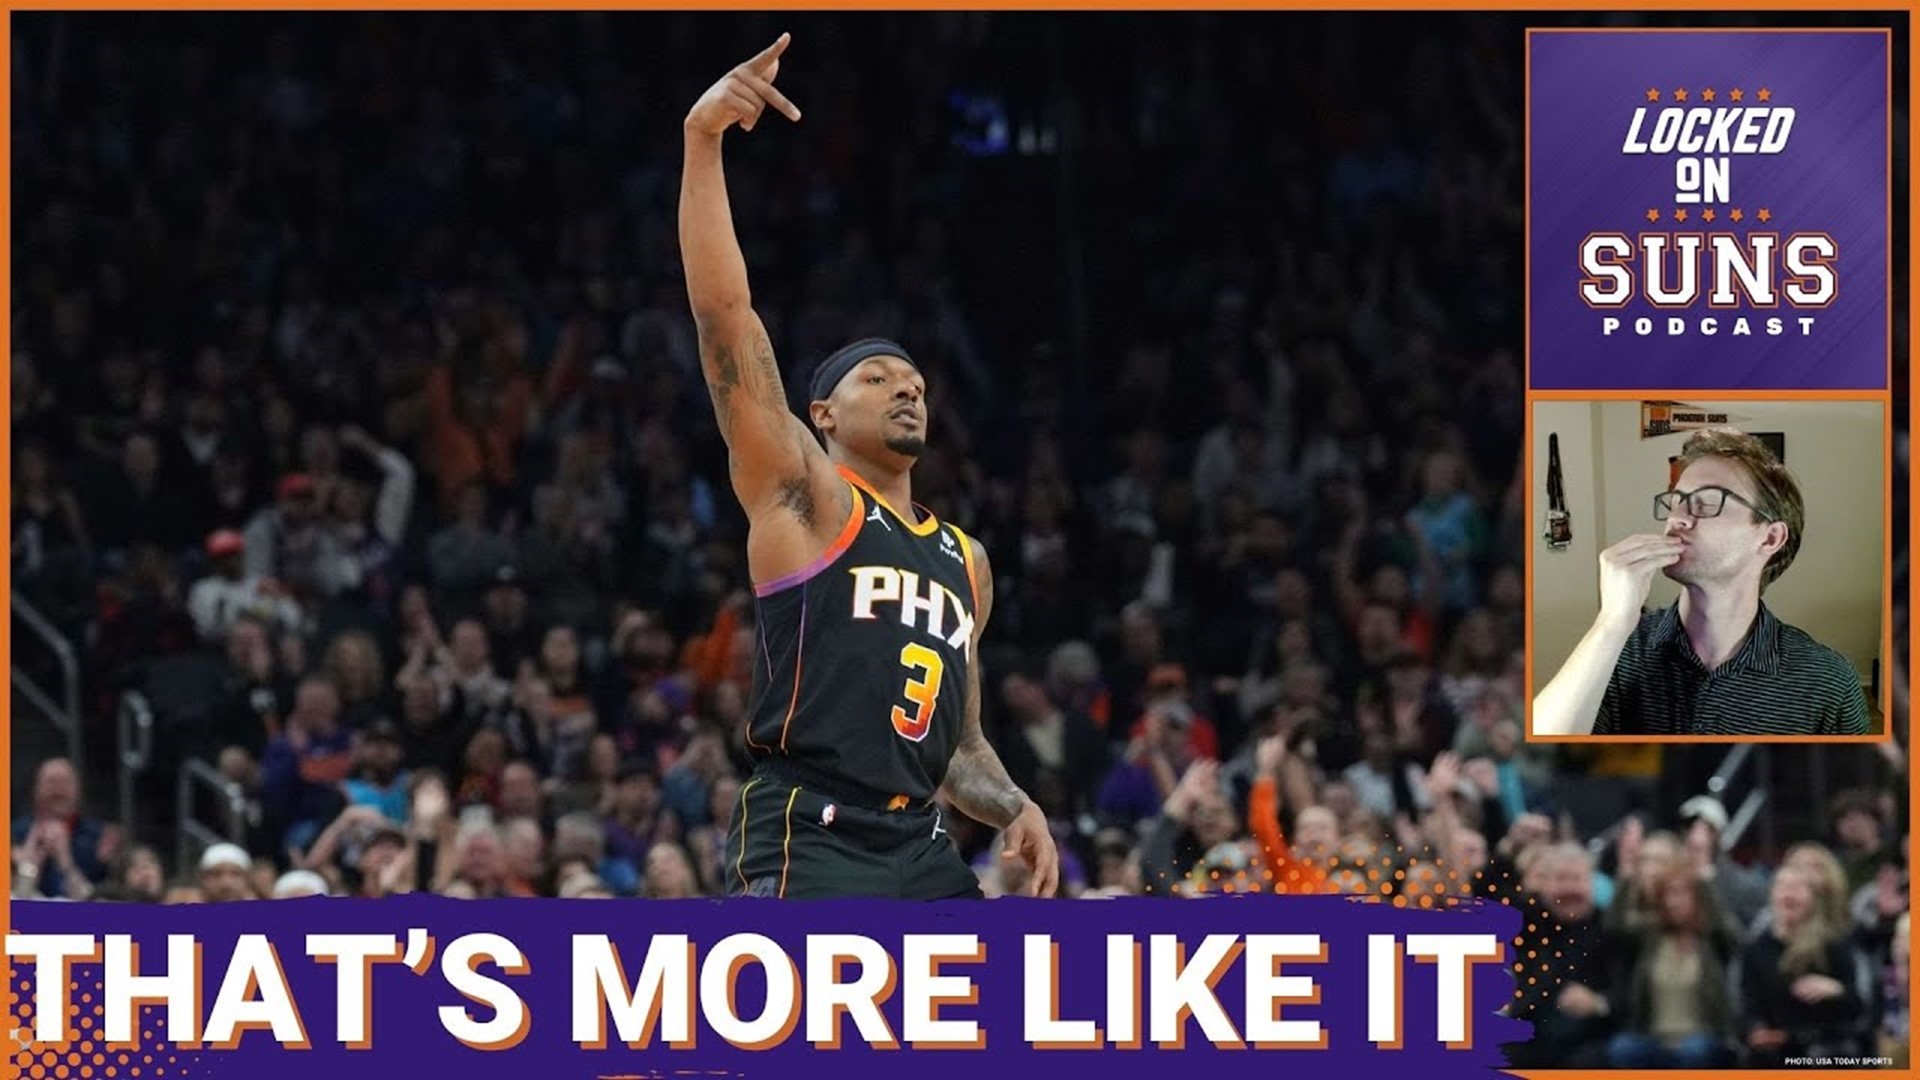 Can the Suns win it all now with Kevin Durant? We asked Devin 